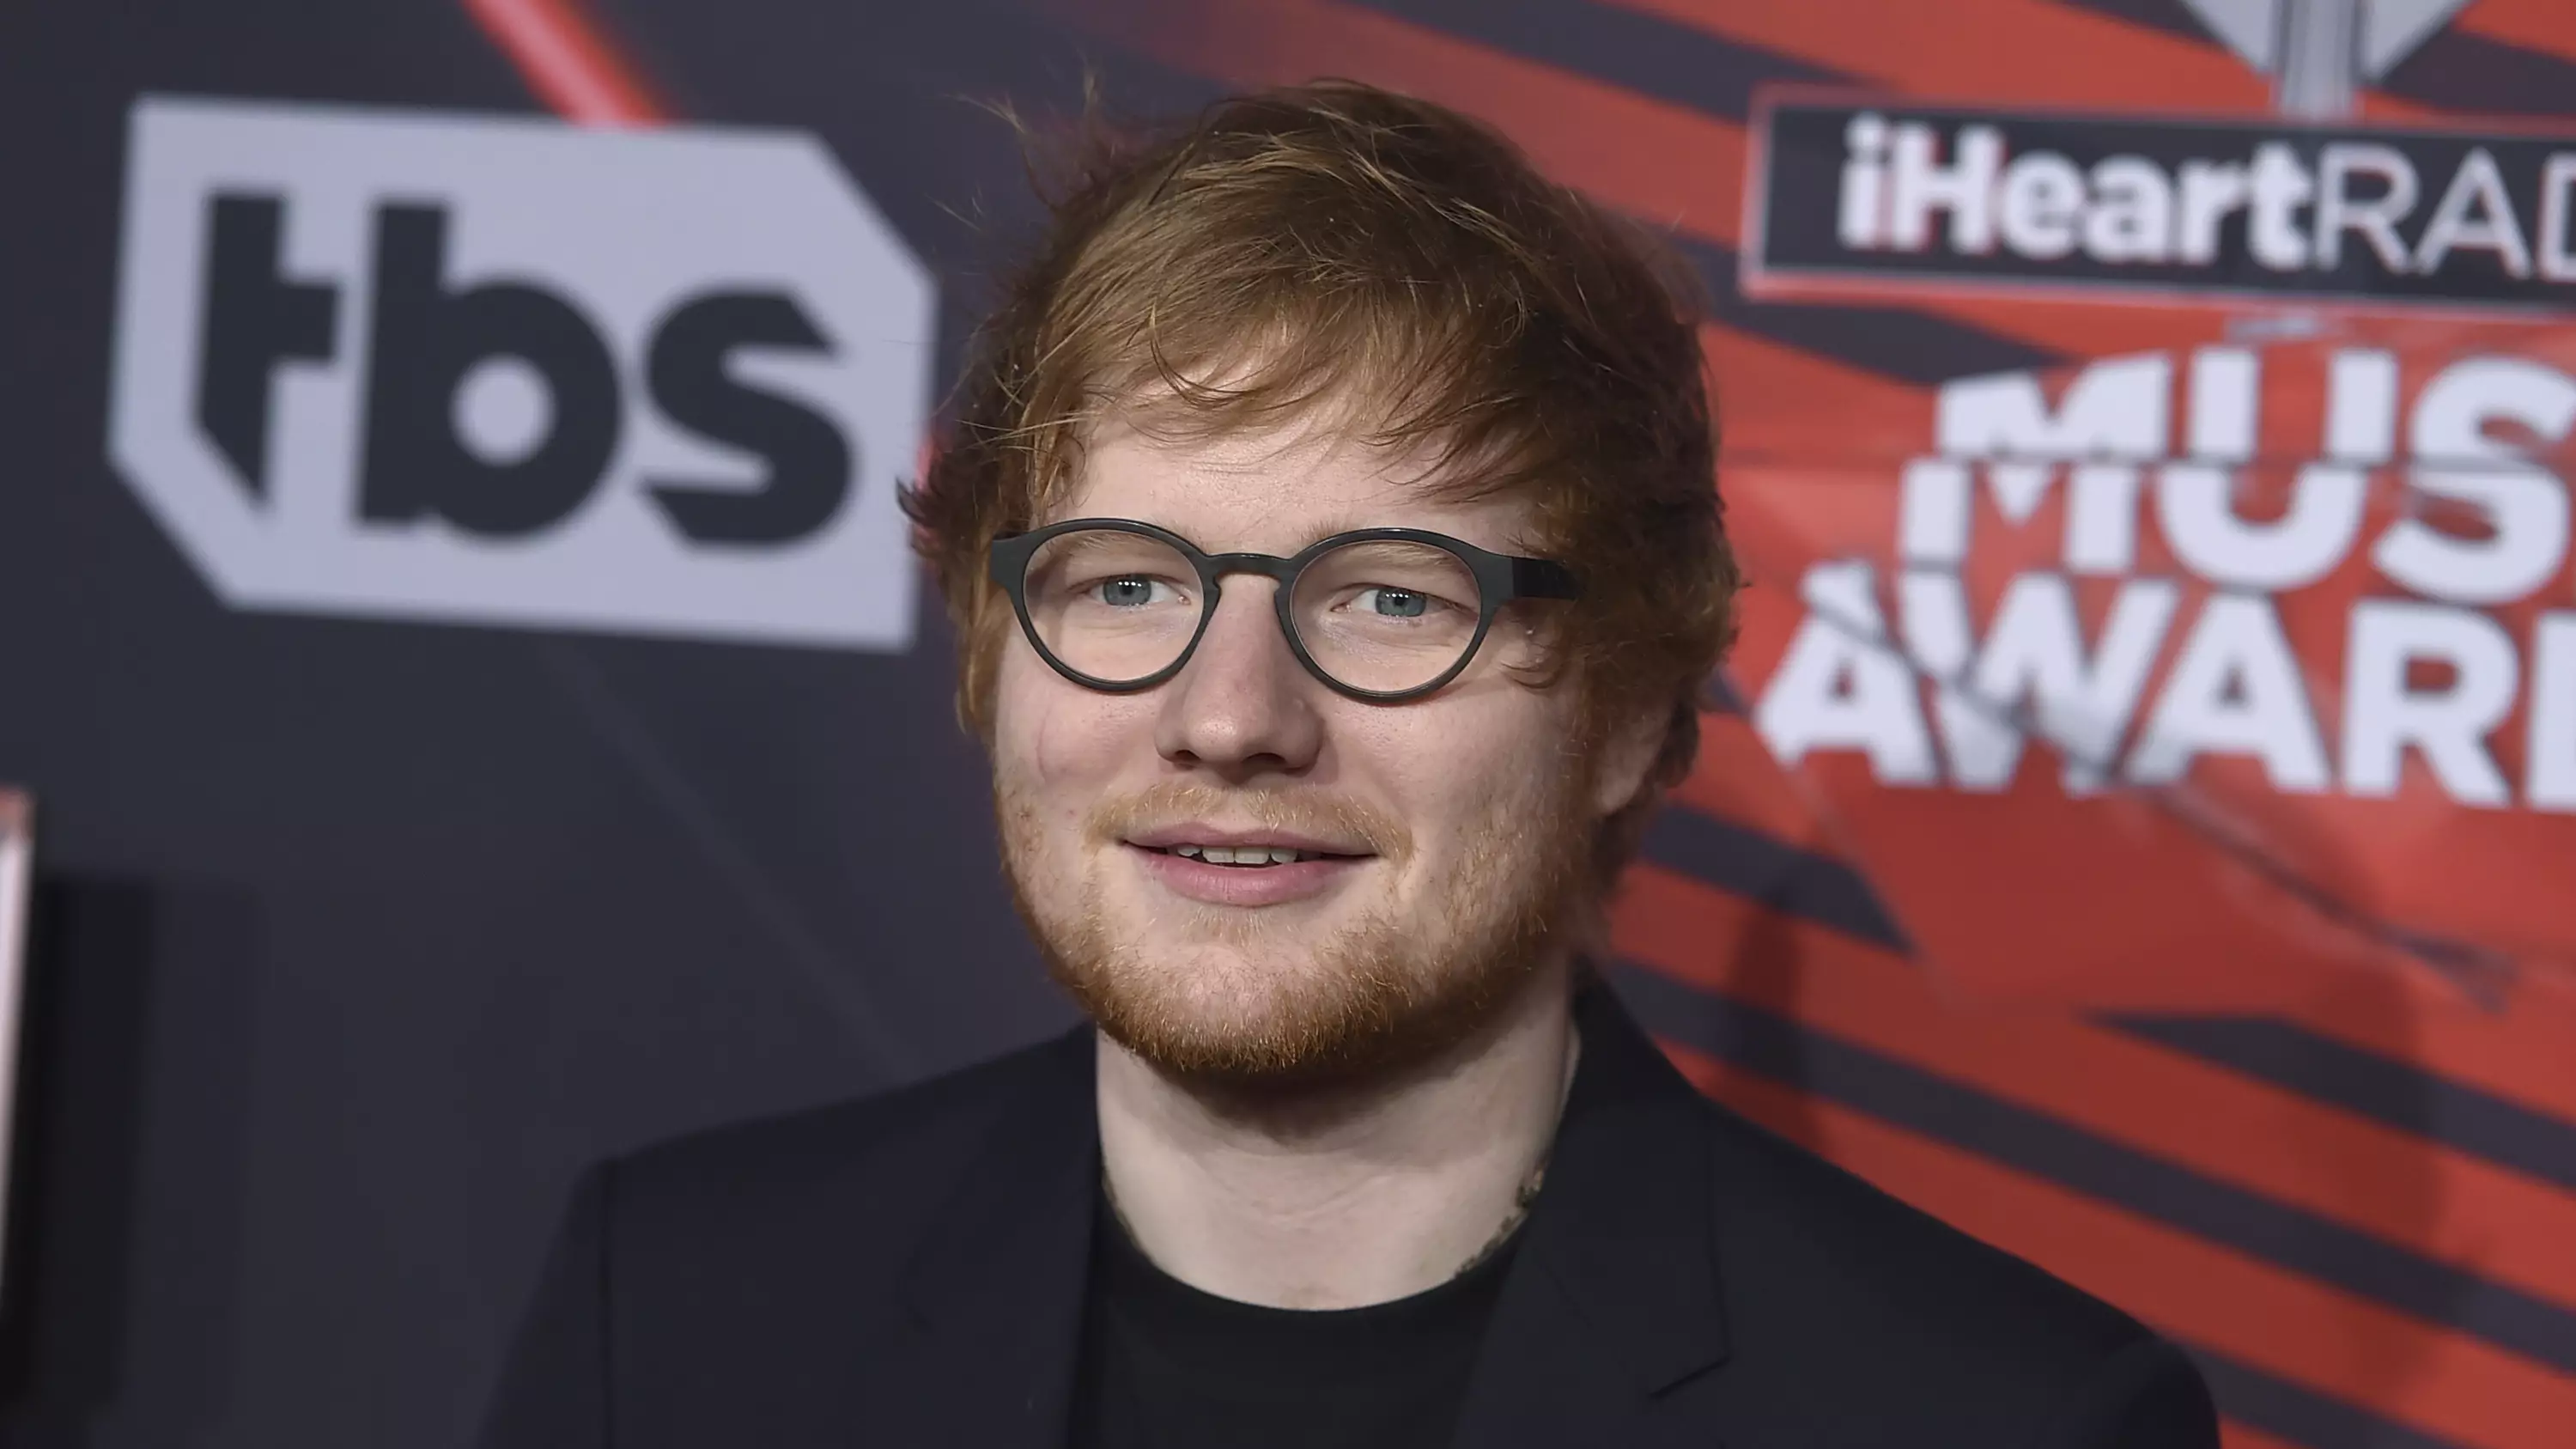 Ed Sheeran Has Completely Dominated Spotify's Top 50 Chart